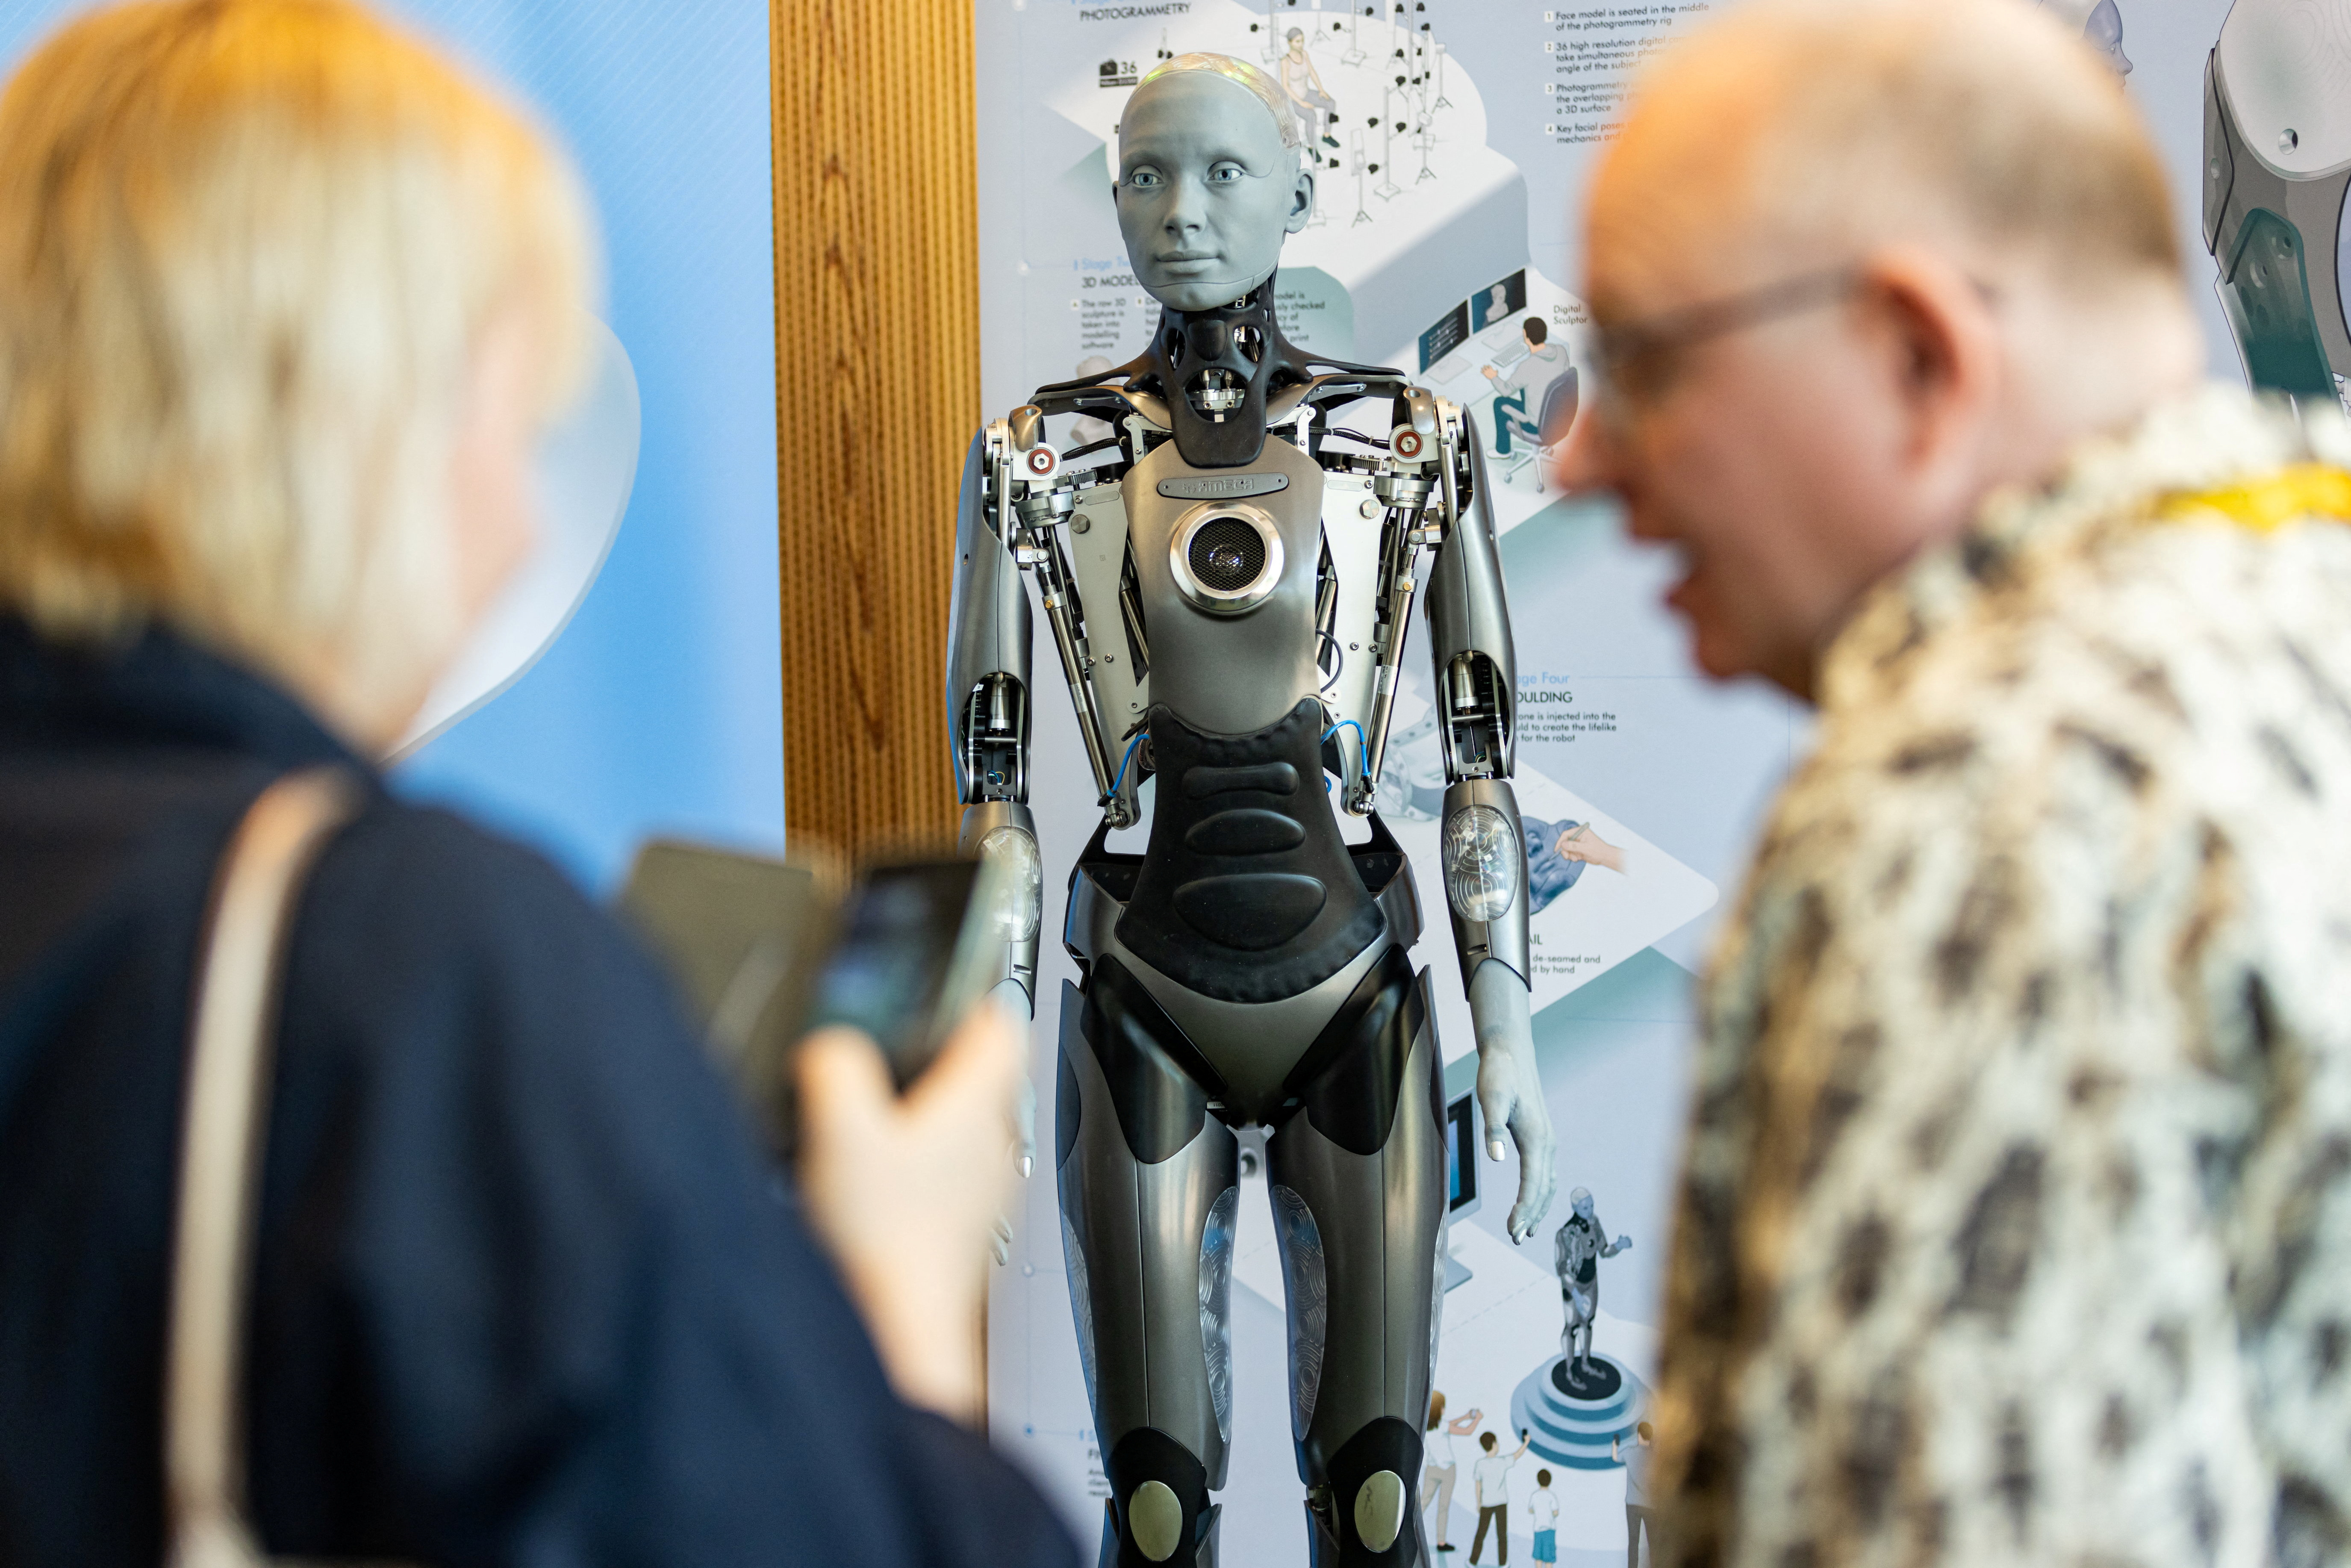 AI press conference robots promise not to rebel. And you believe them?